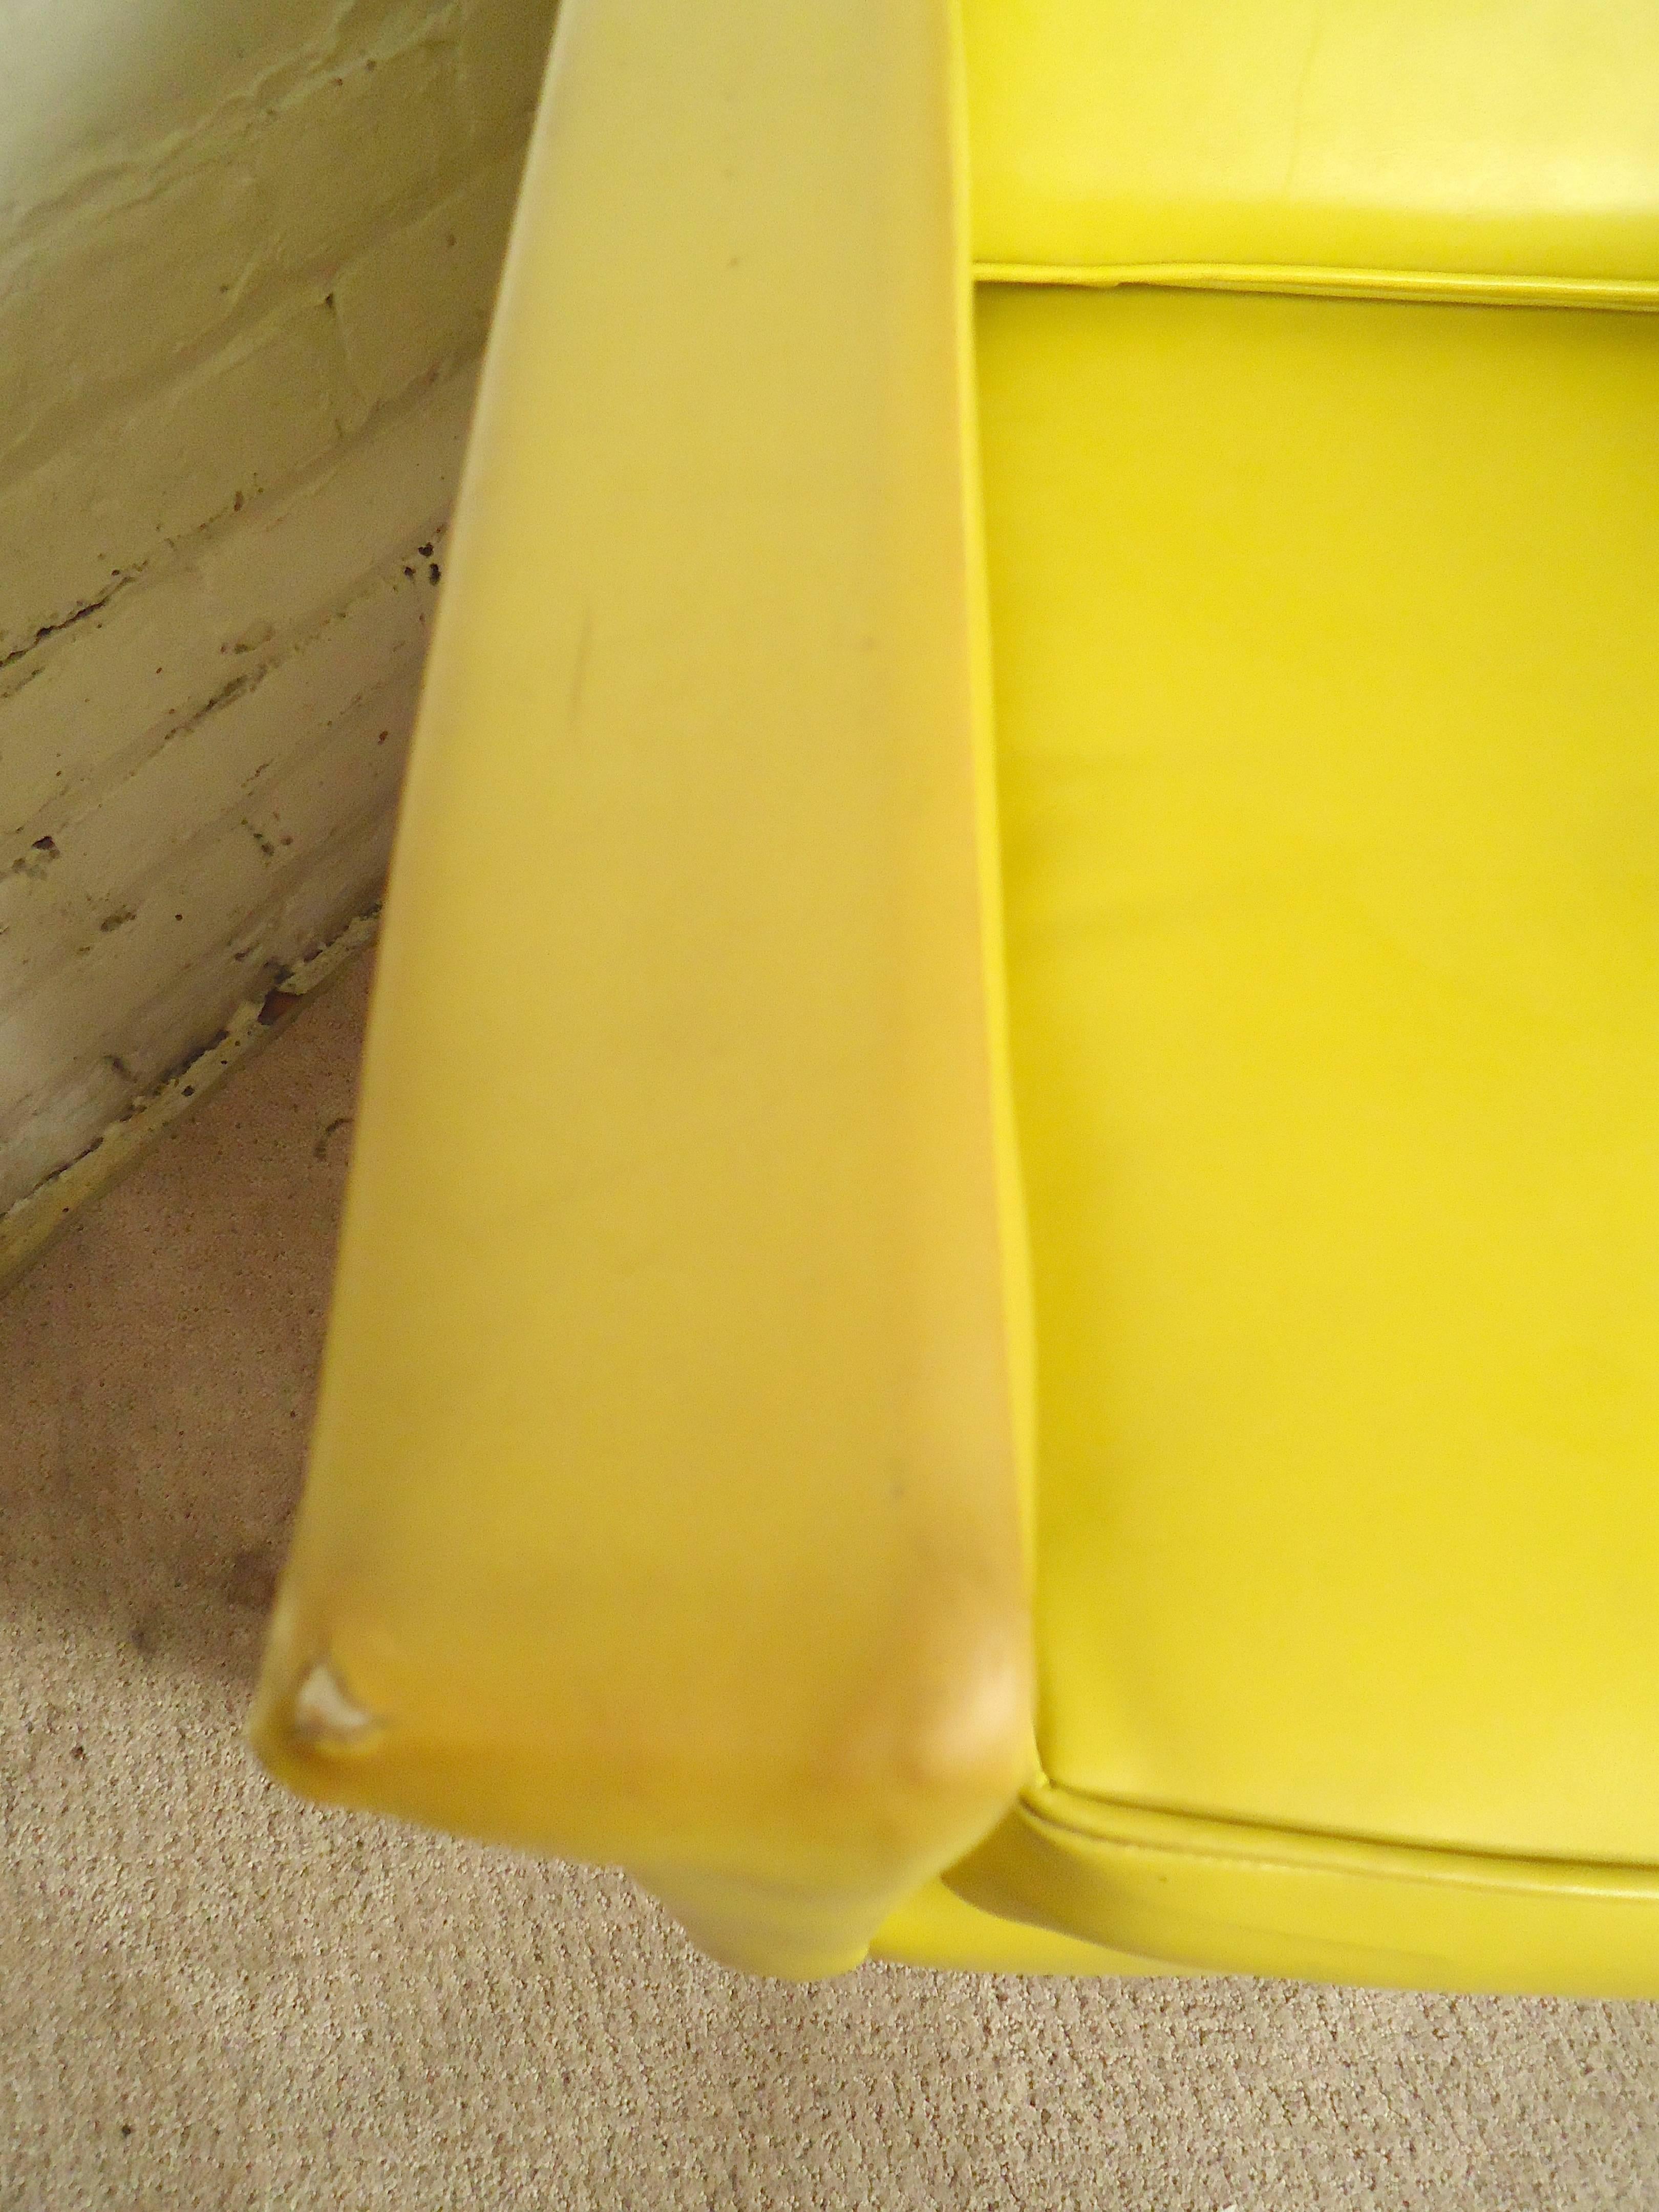 Mid-20th Century Pair Mid-Century Modern Lounge Chairs, Yellow and Red